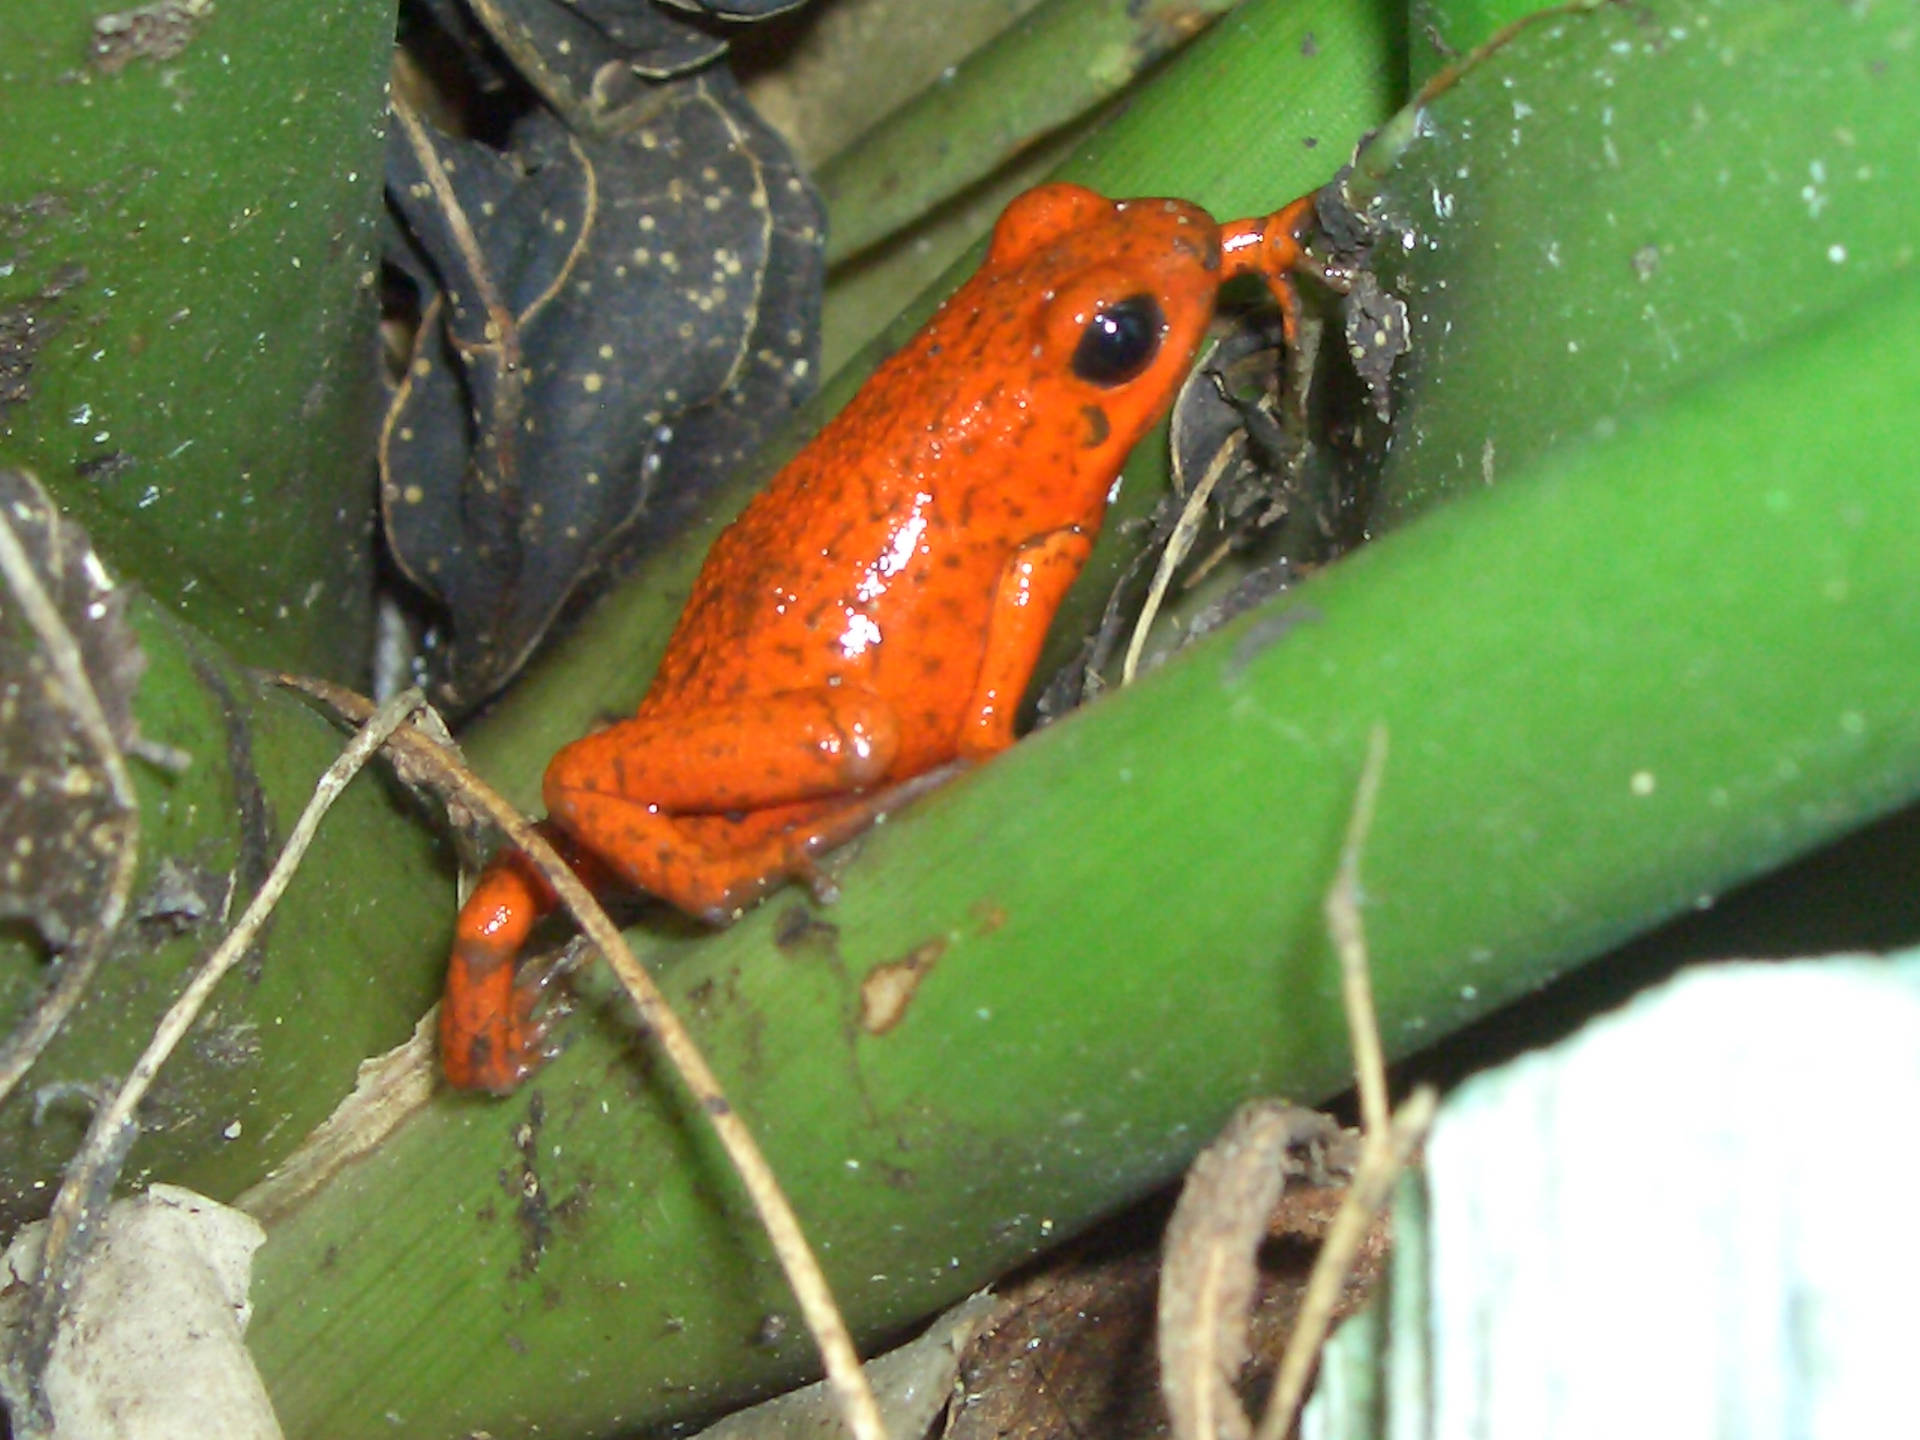 Cute Frog With Bright Orange Skin Background